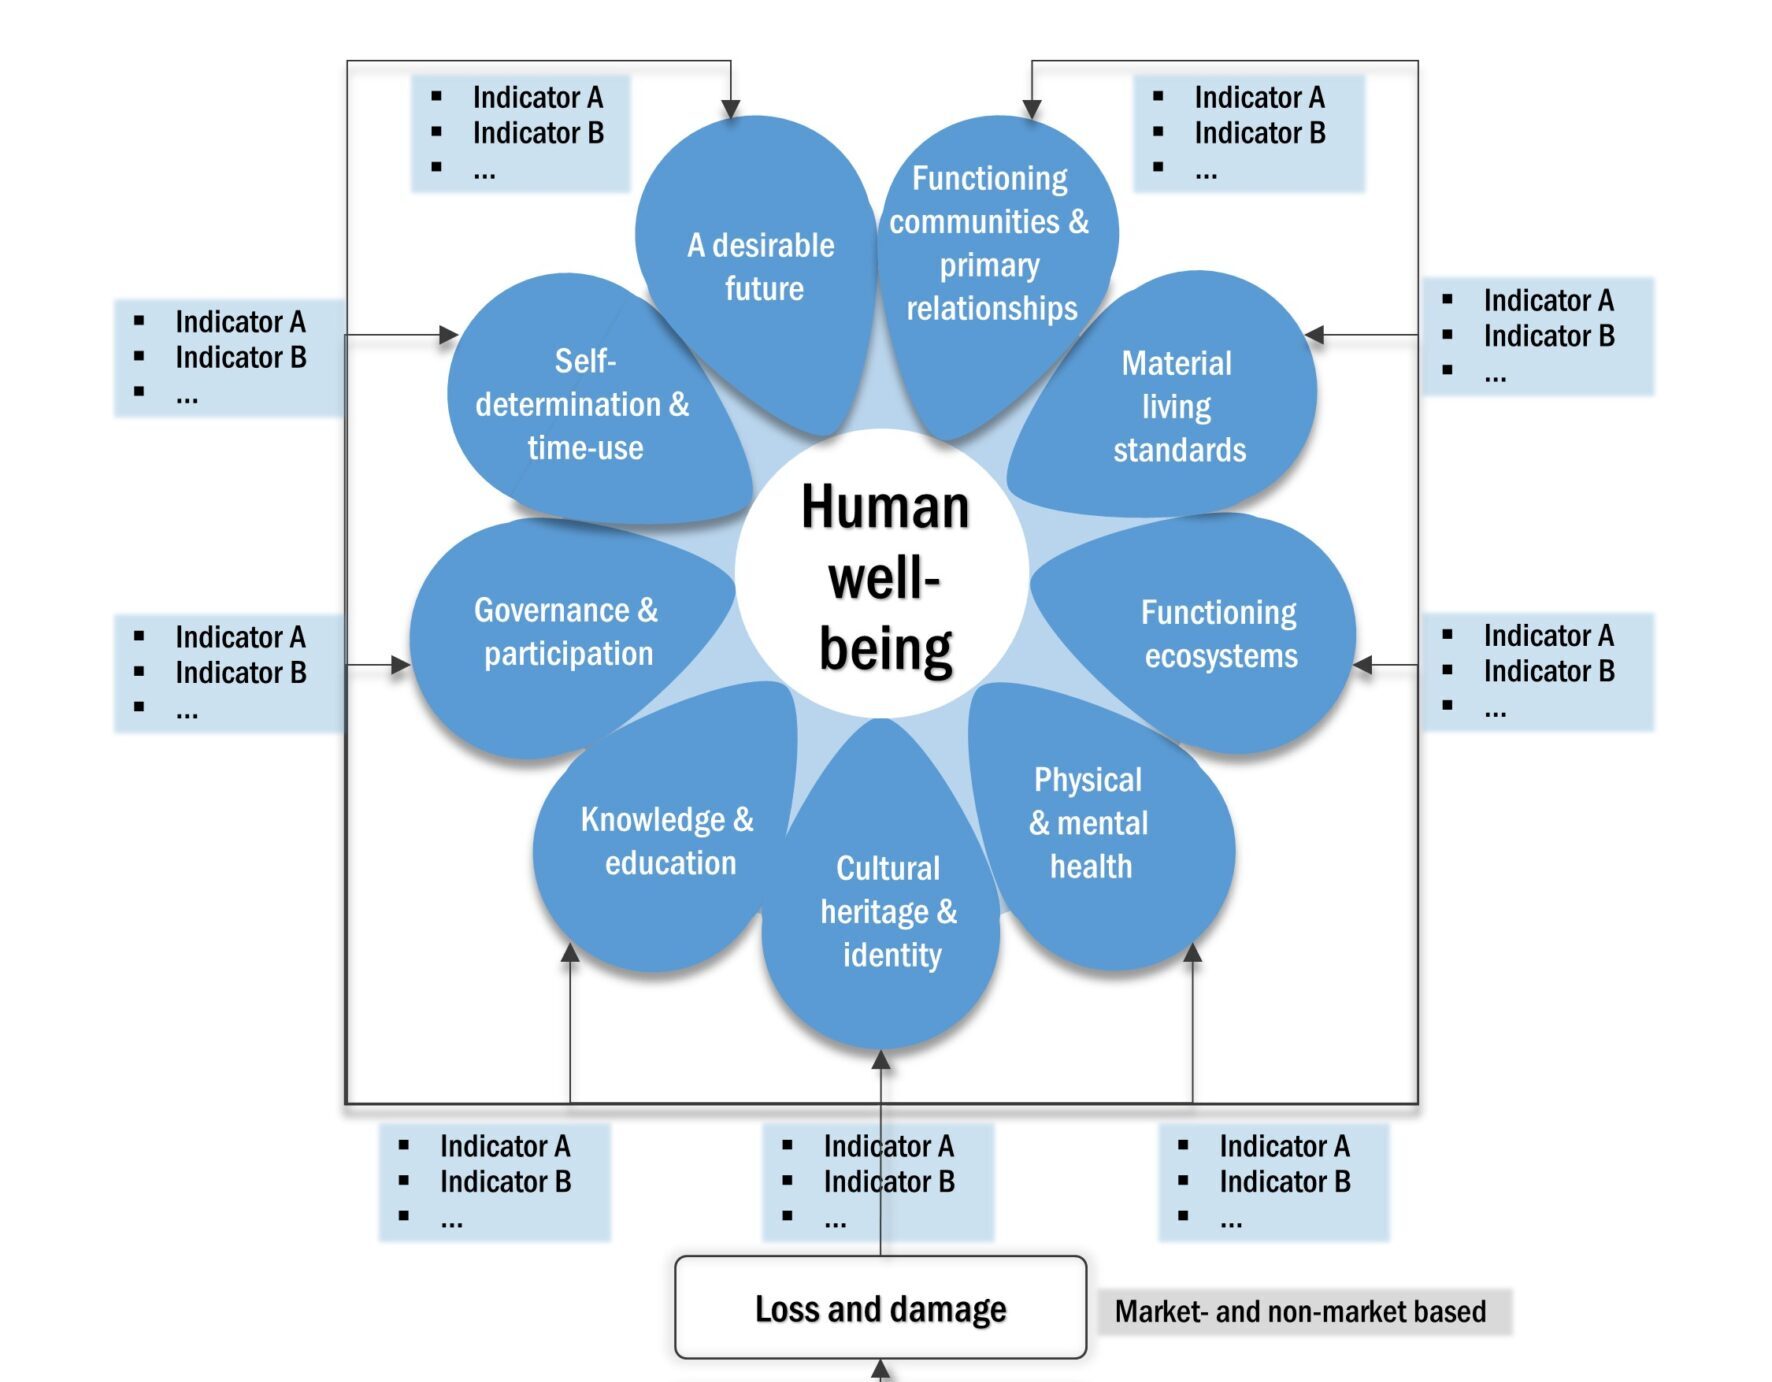 Human well-being loss and damage